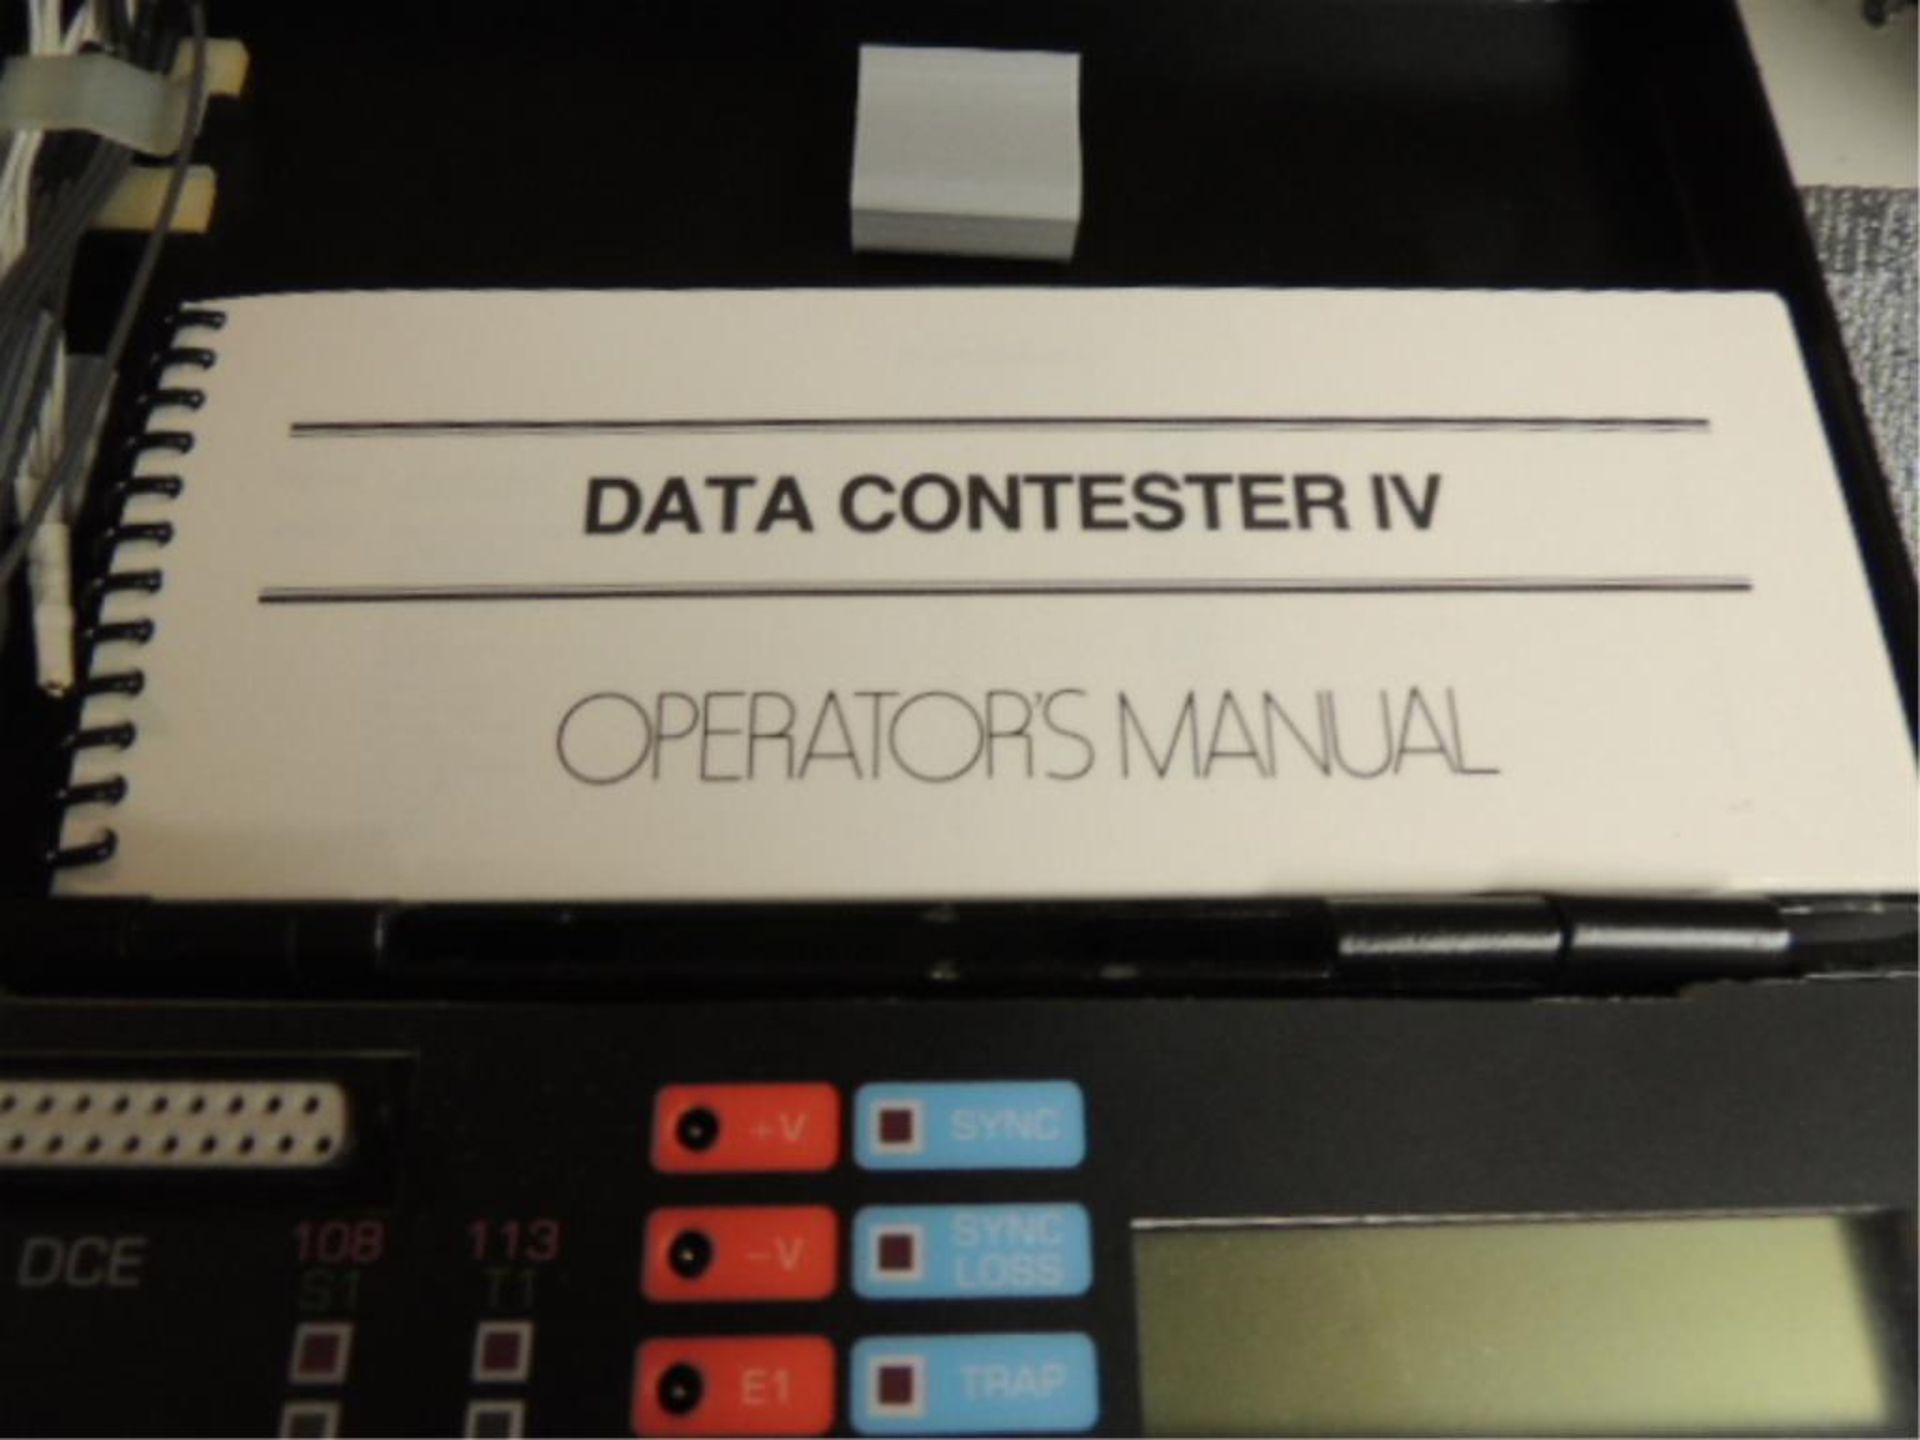 Micon DT 025 Tester; Black box data contester IV. HIT# 2192402. Loc: 901 cage. Asset Located at 64 - Image 5 of 5